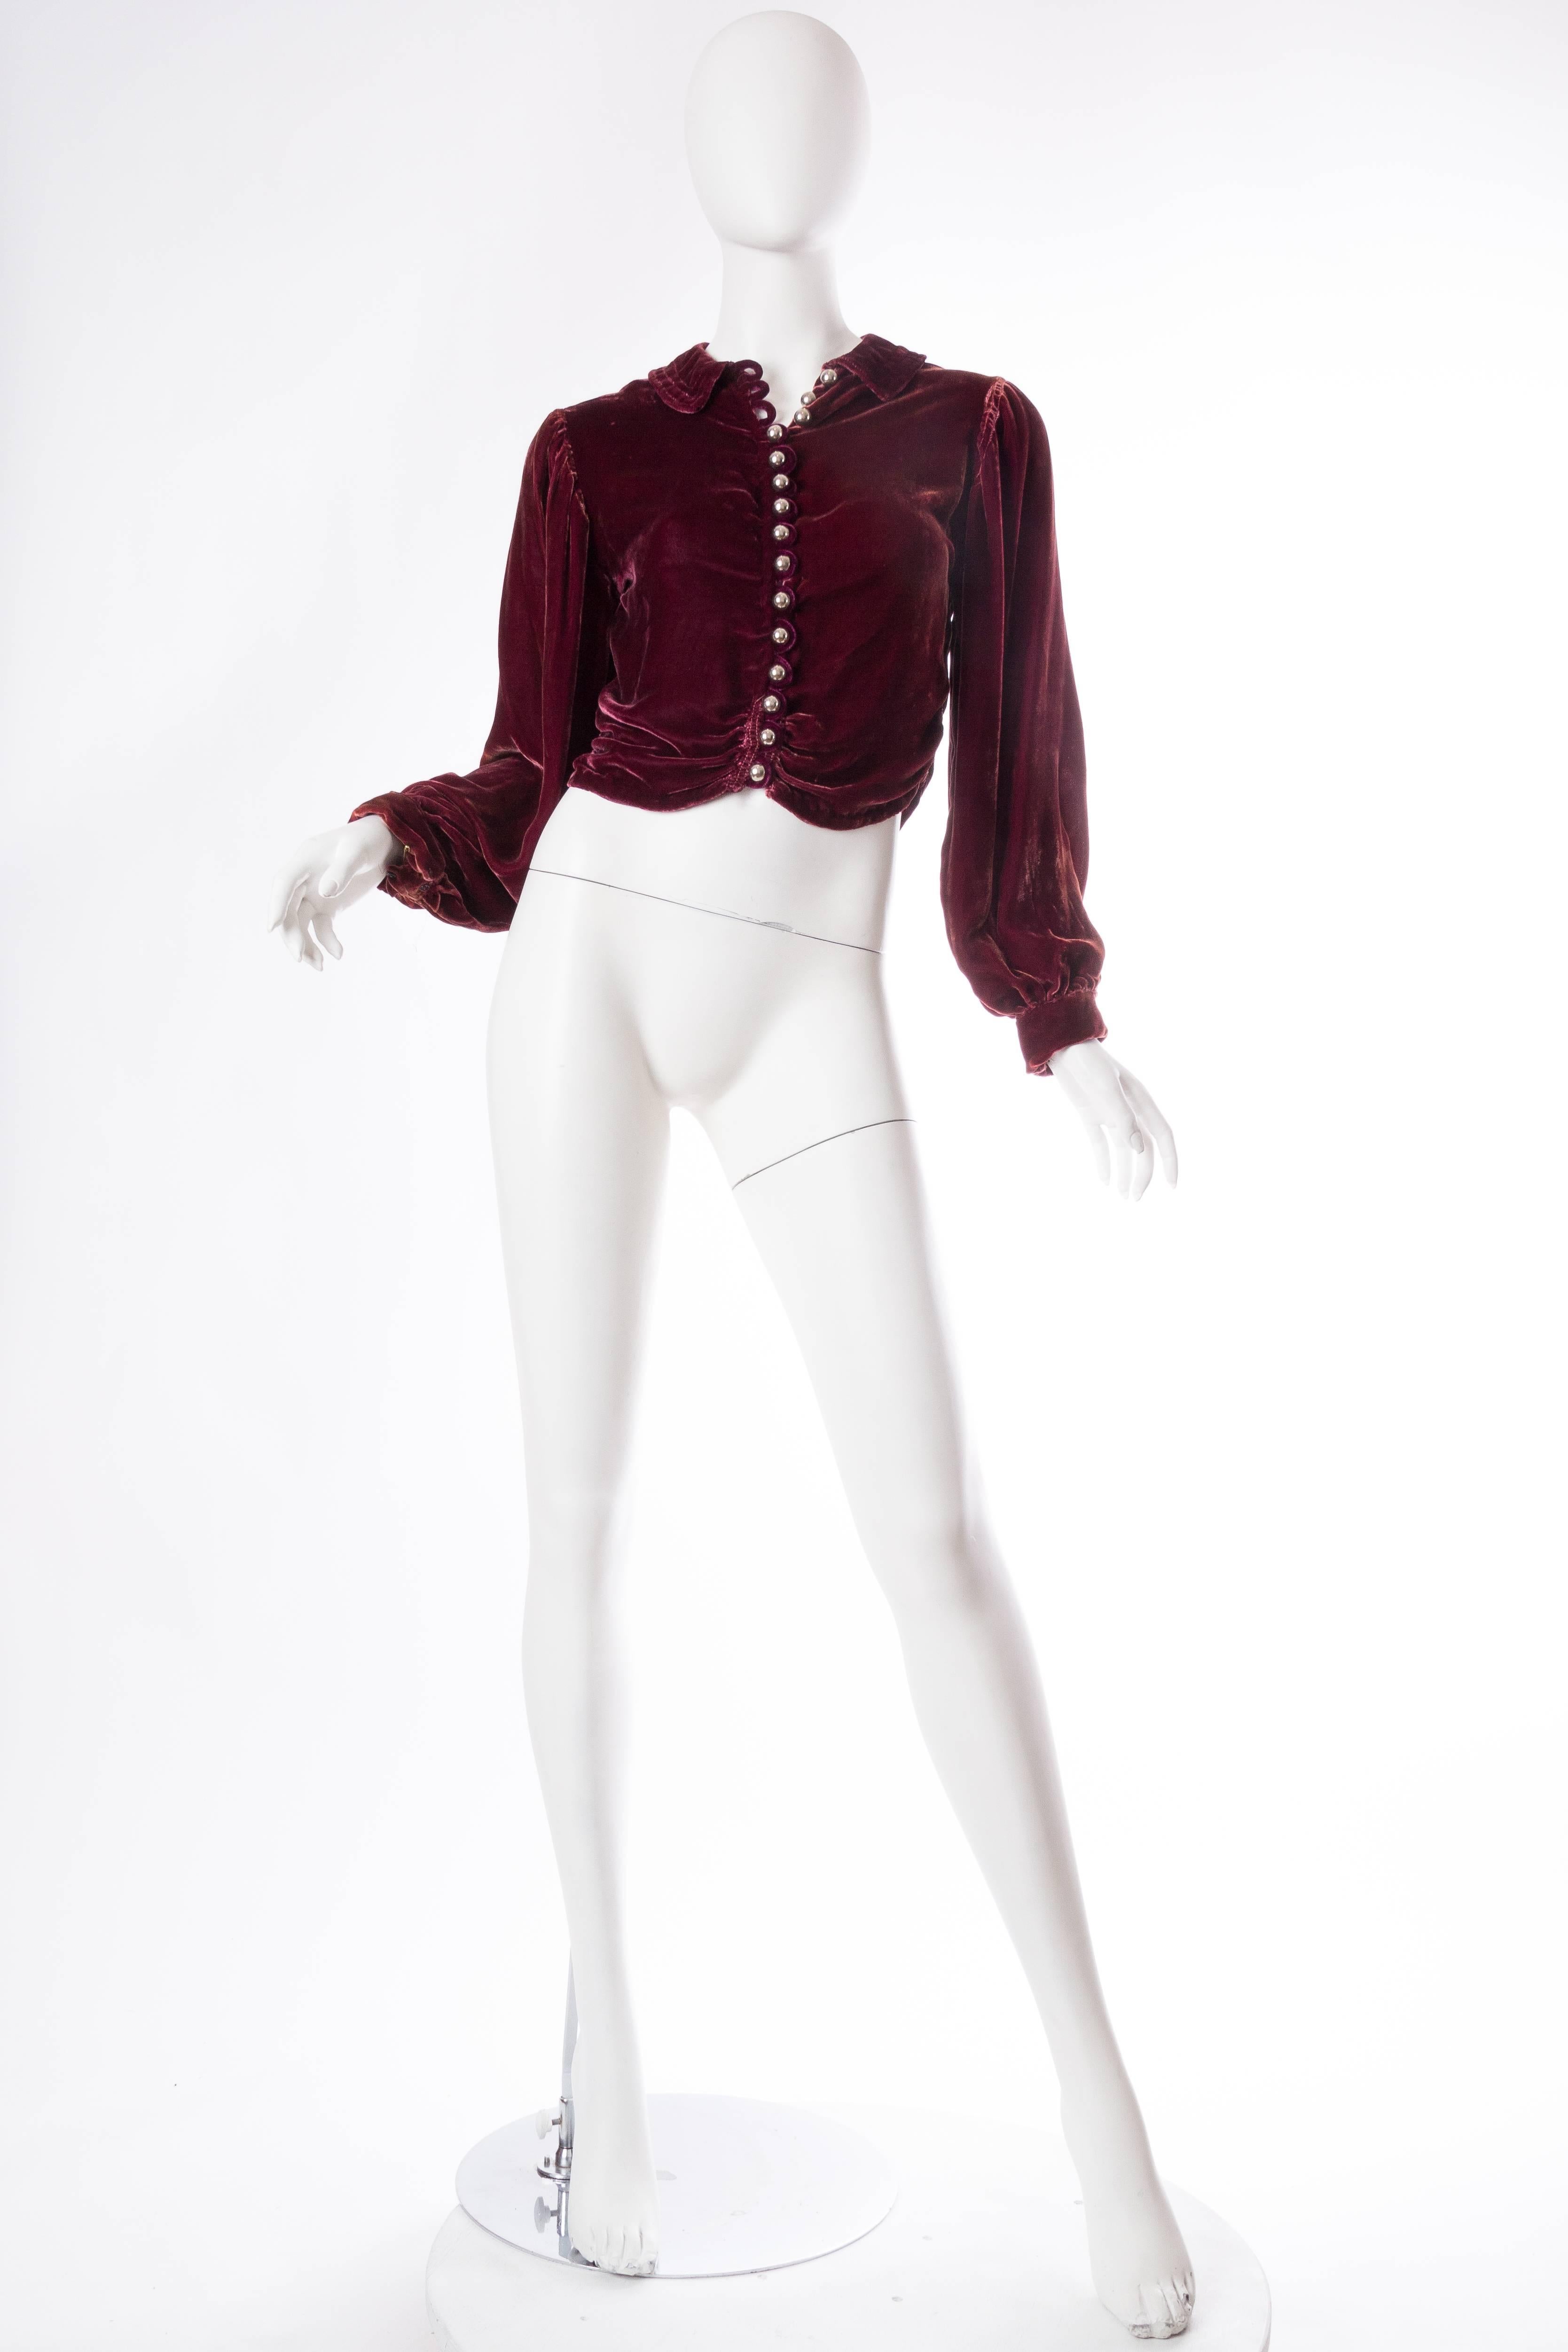 Backless Silk Velvet Gown from the 1930s with Matching Jacket 3